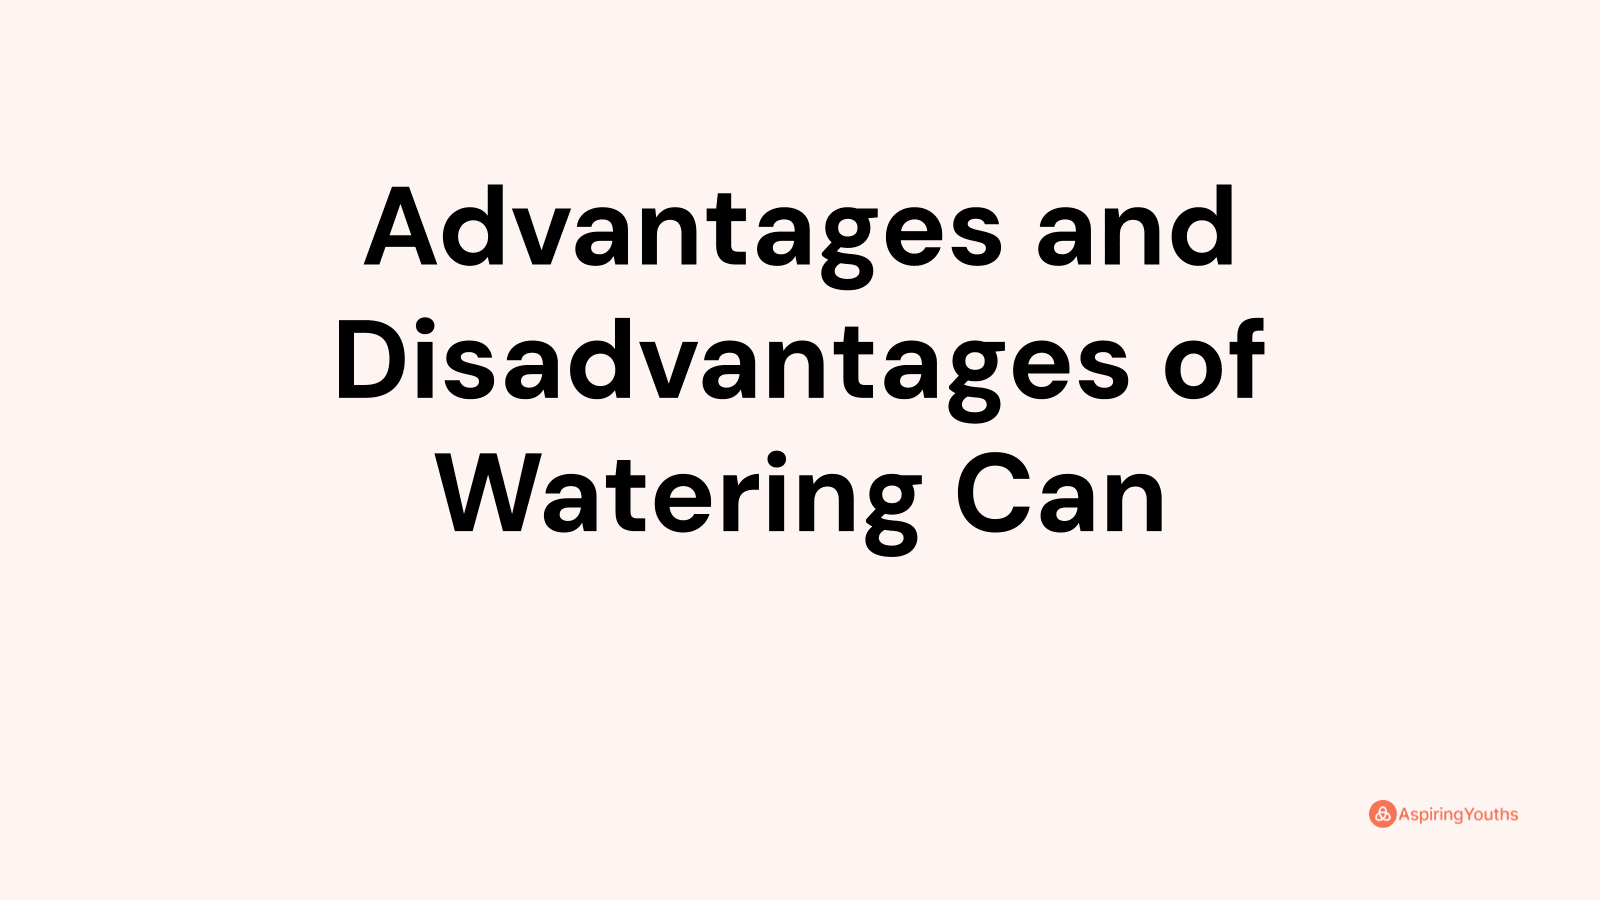 Advantages and disadvantages of Watering Can